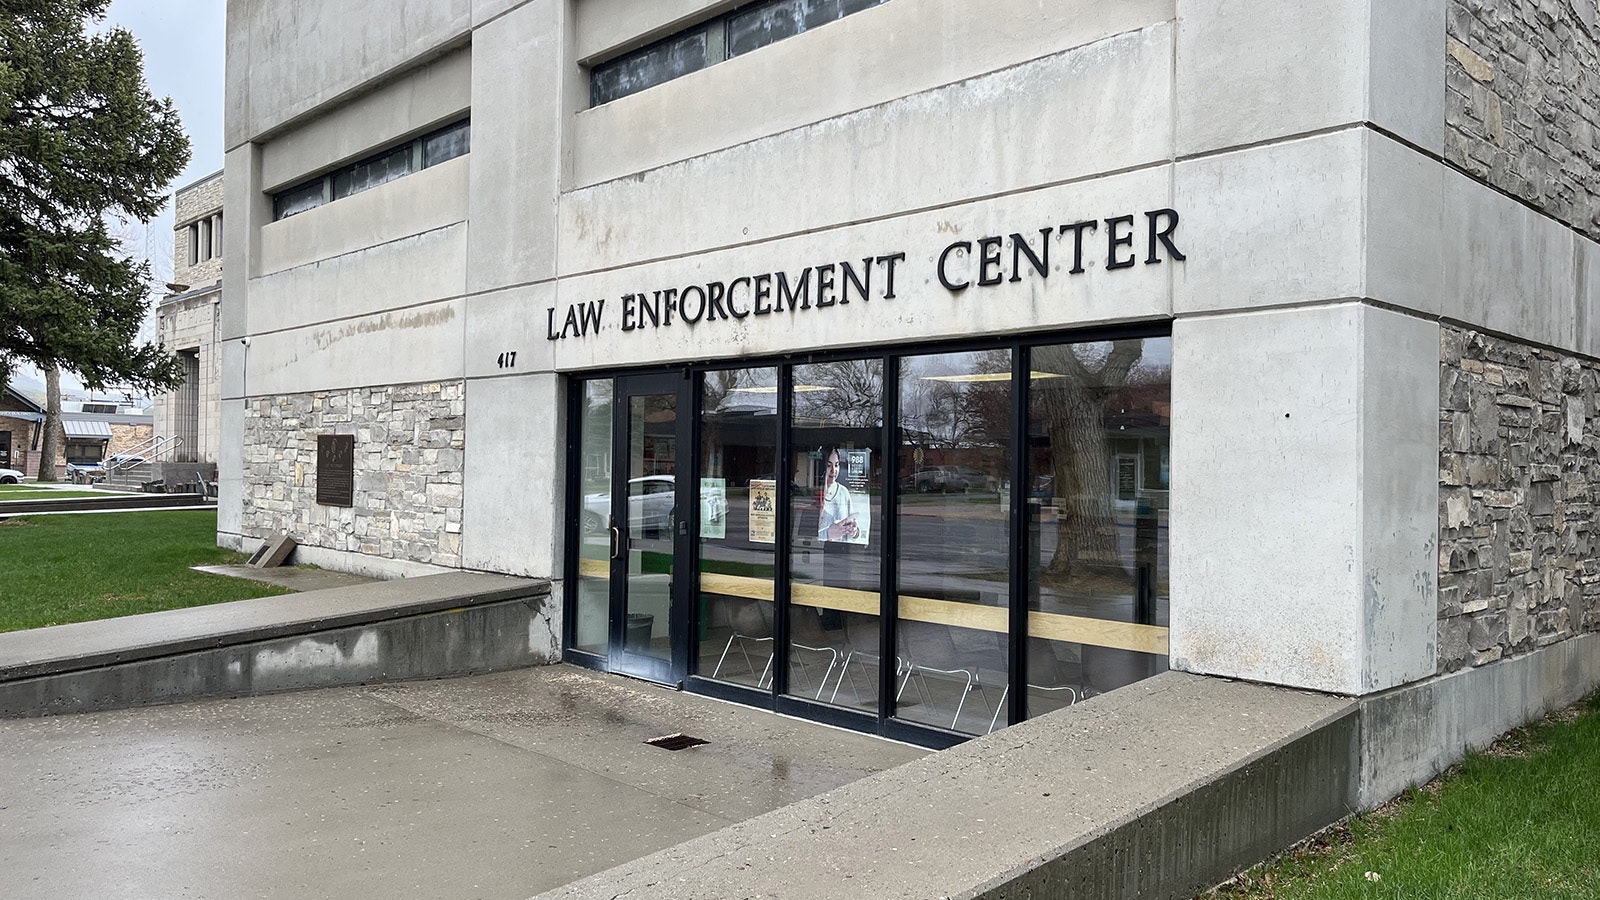 The Law Enforcement Center houses the Thermopolis Police Department.